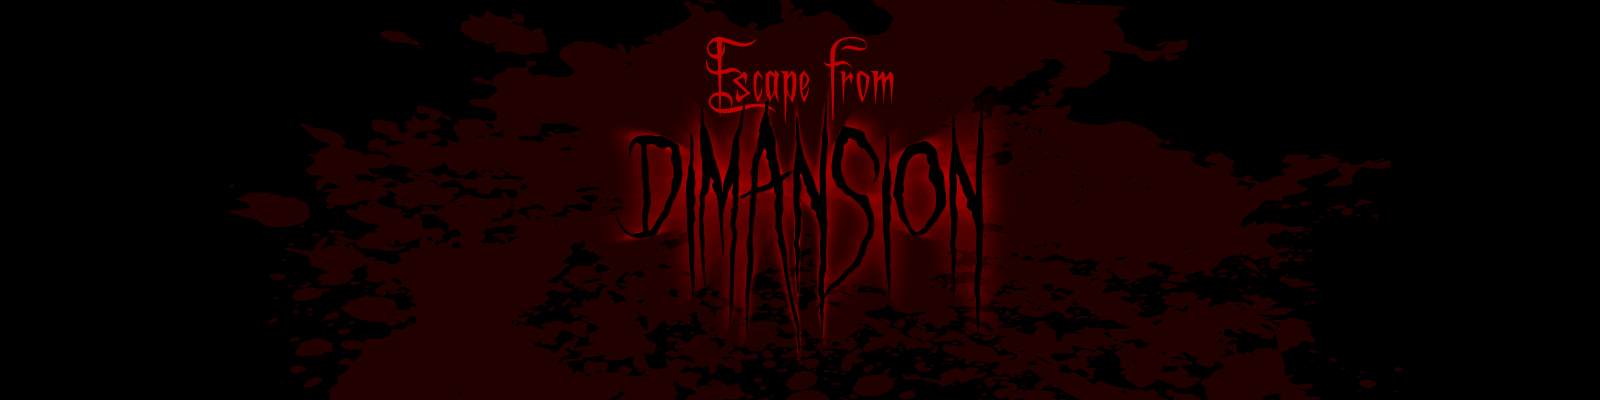 Escape from DIMANSION